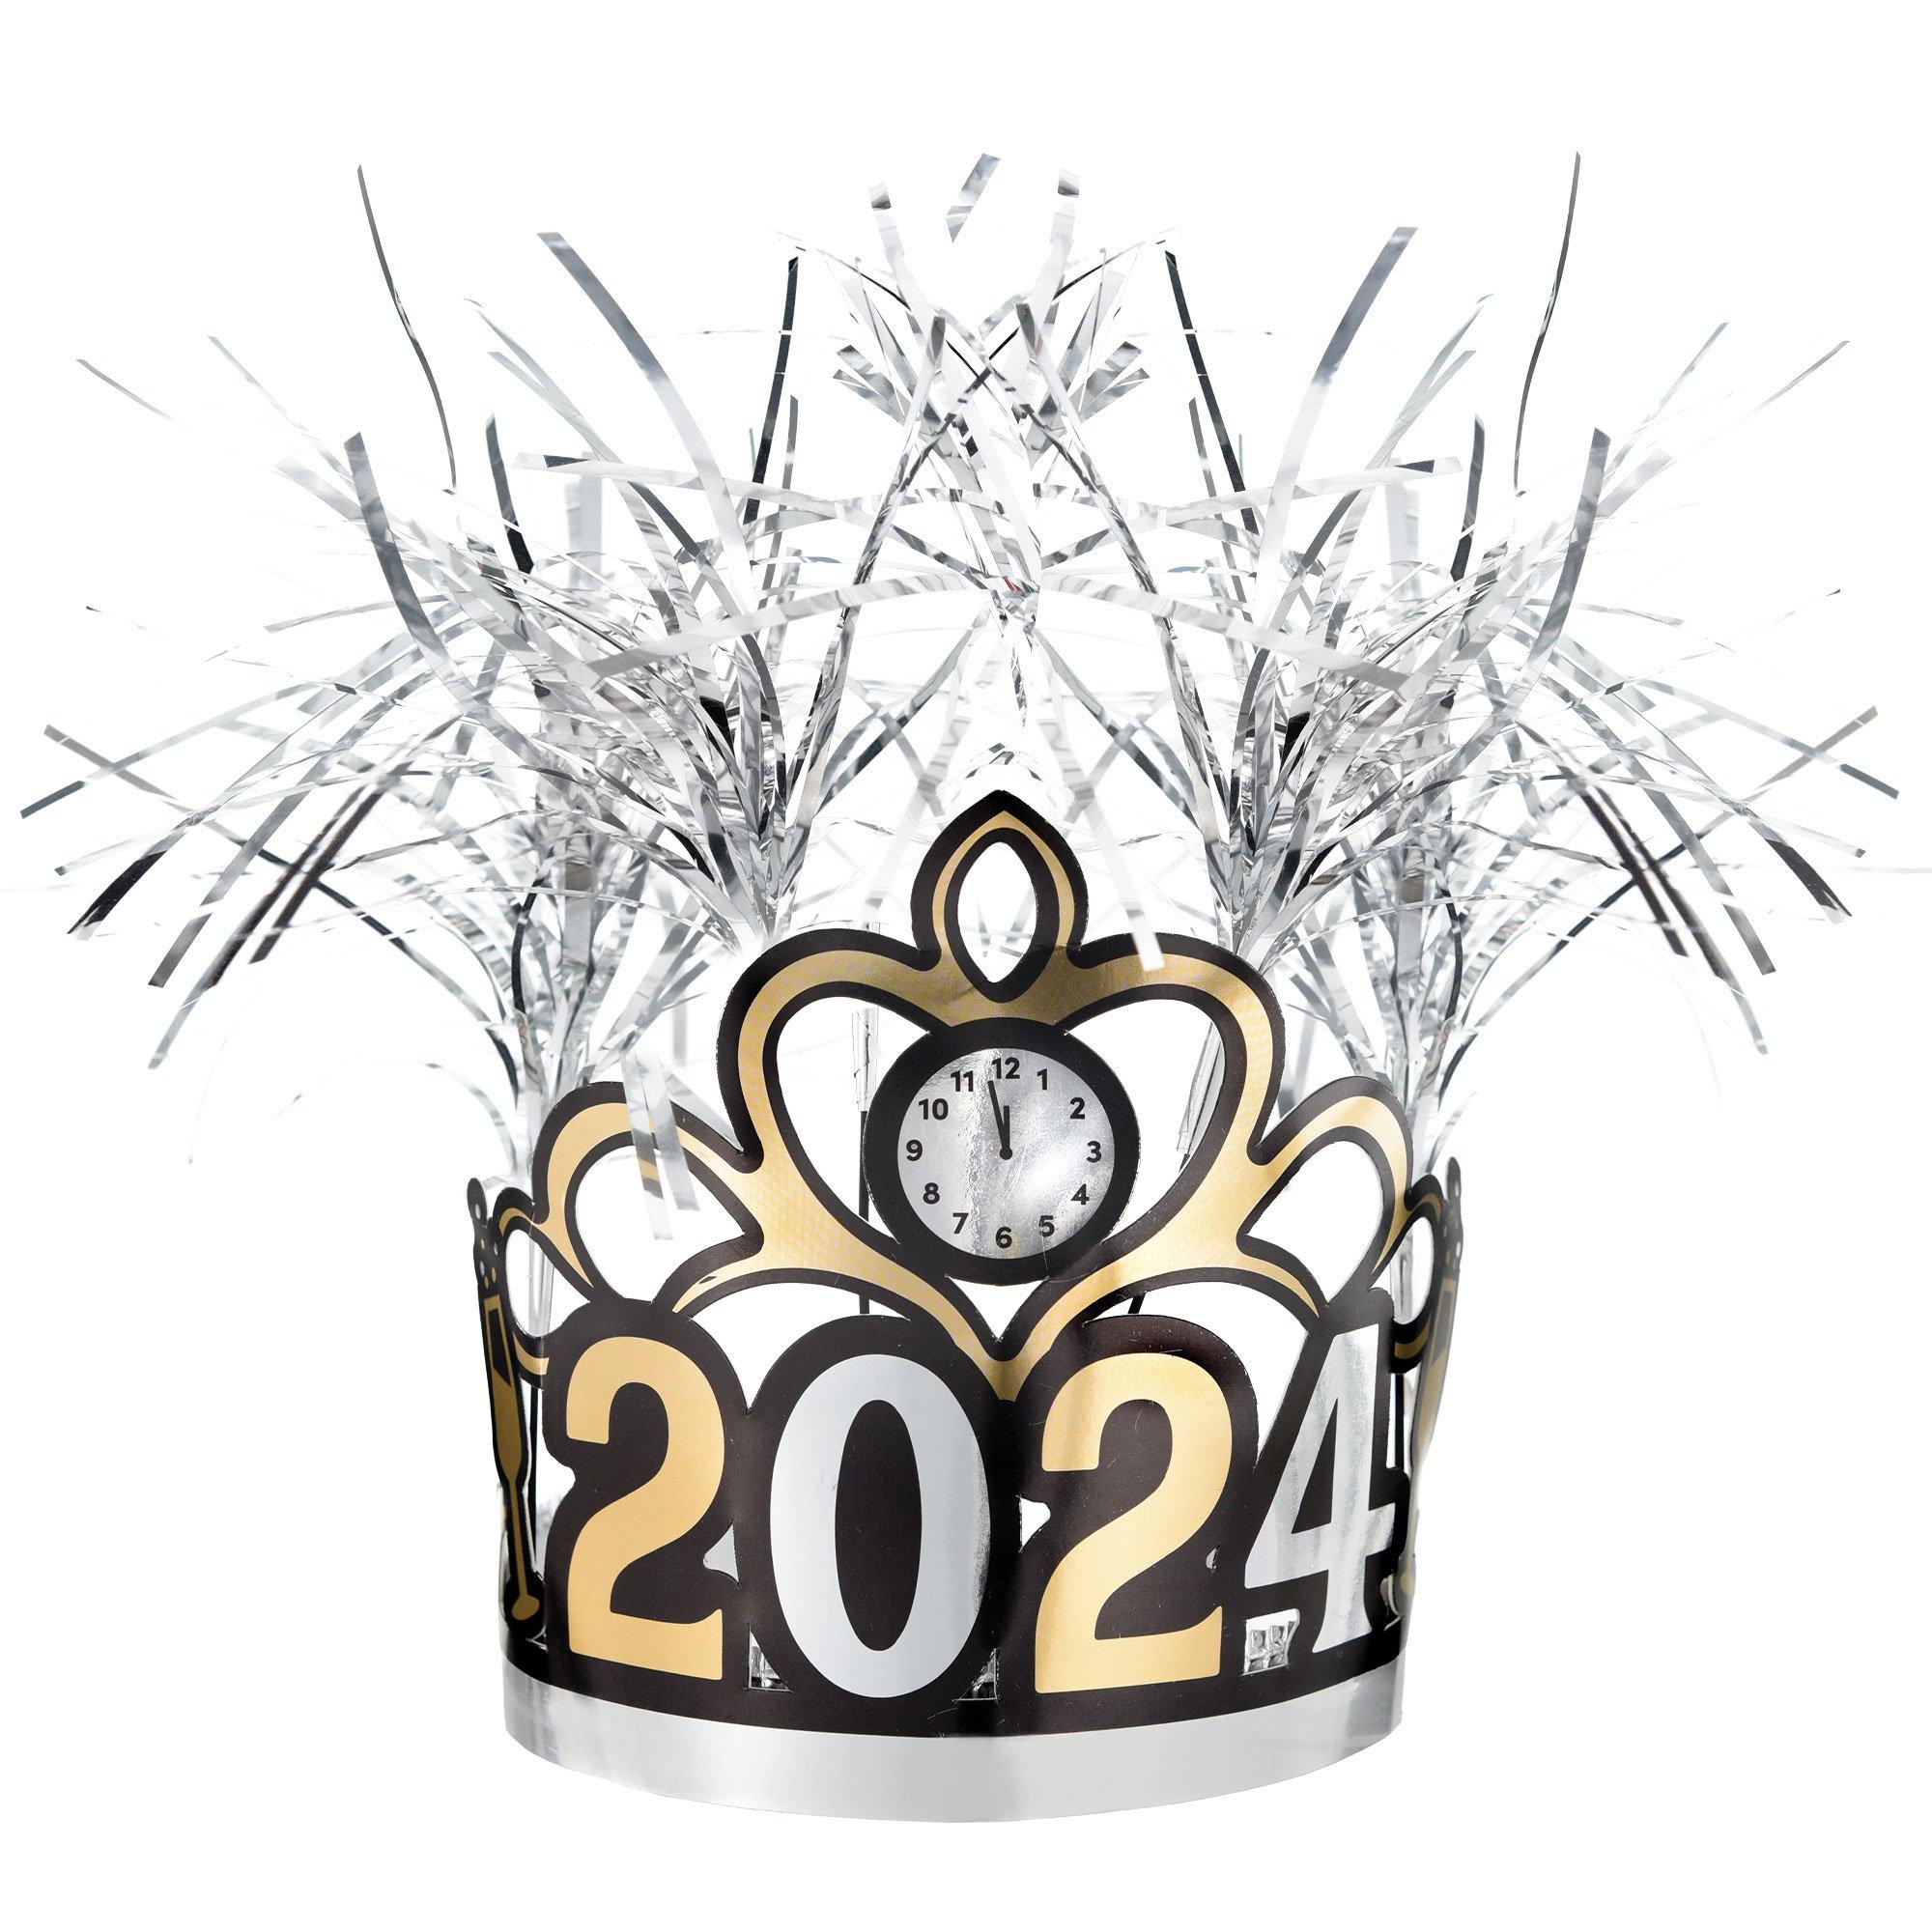 How to Make a Glittery Foil Kids Crown for New Year's Eve